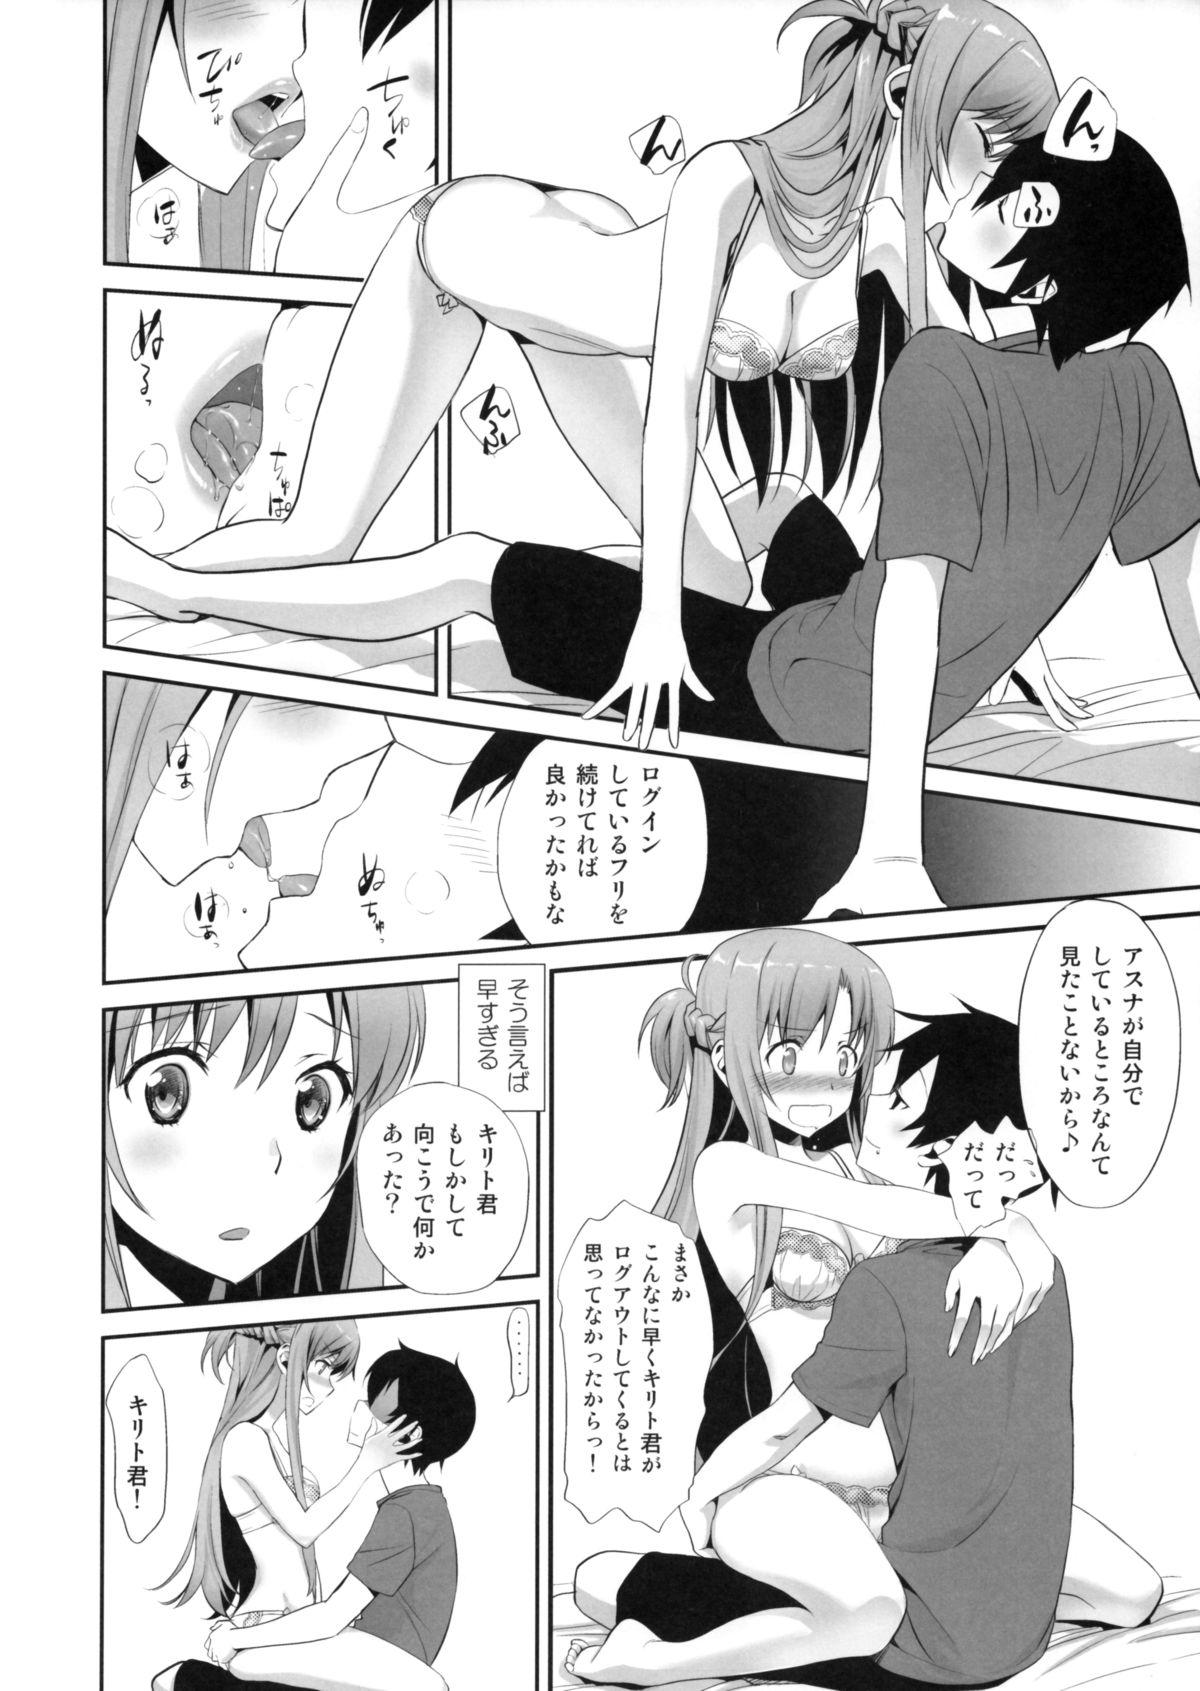 Parties Sunny-side up? - Sword art online Amature Porn - Page 11